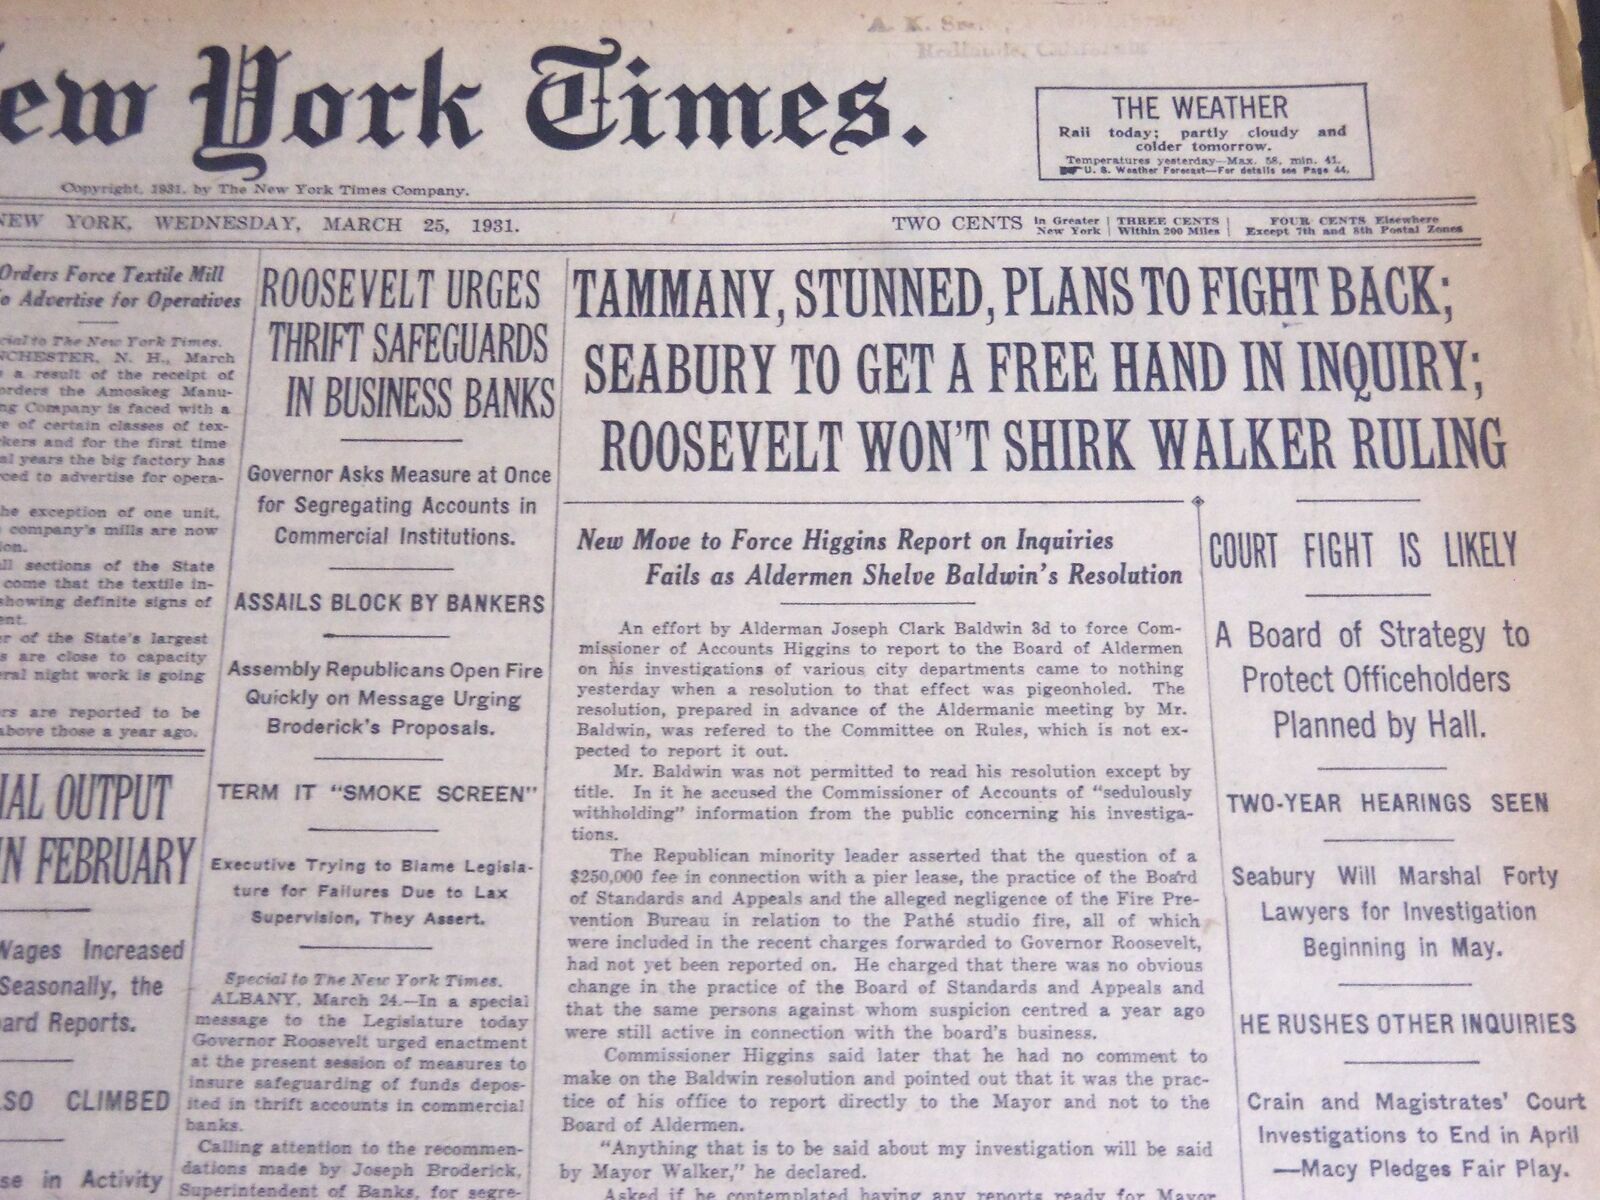 1931 MARCH 25 NEW YORK TIMES - TAMMANY STUNNED SEABURY TO GET FREE HAND- NT 6670